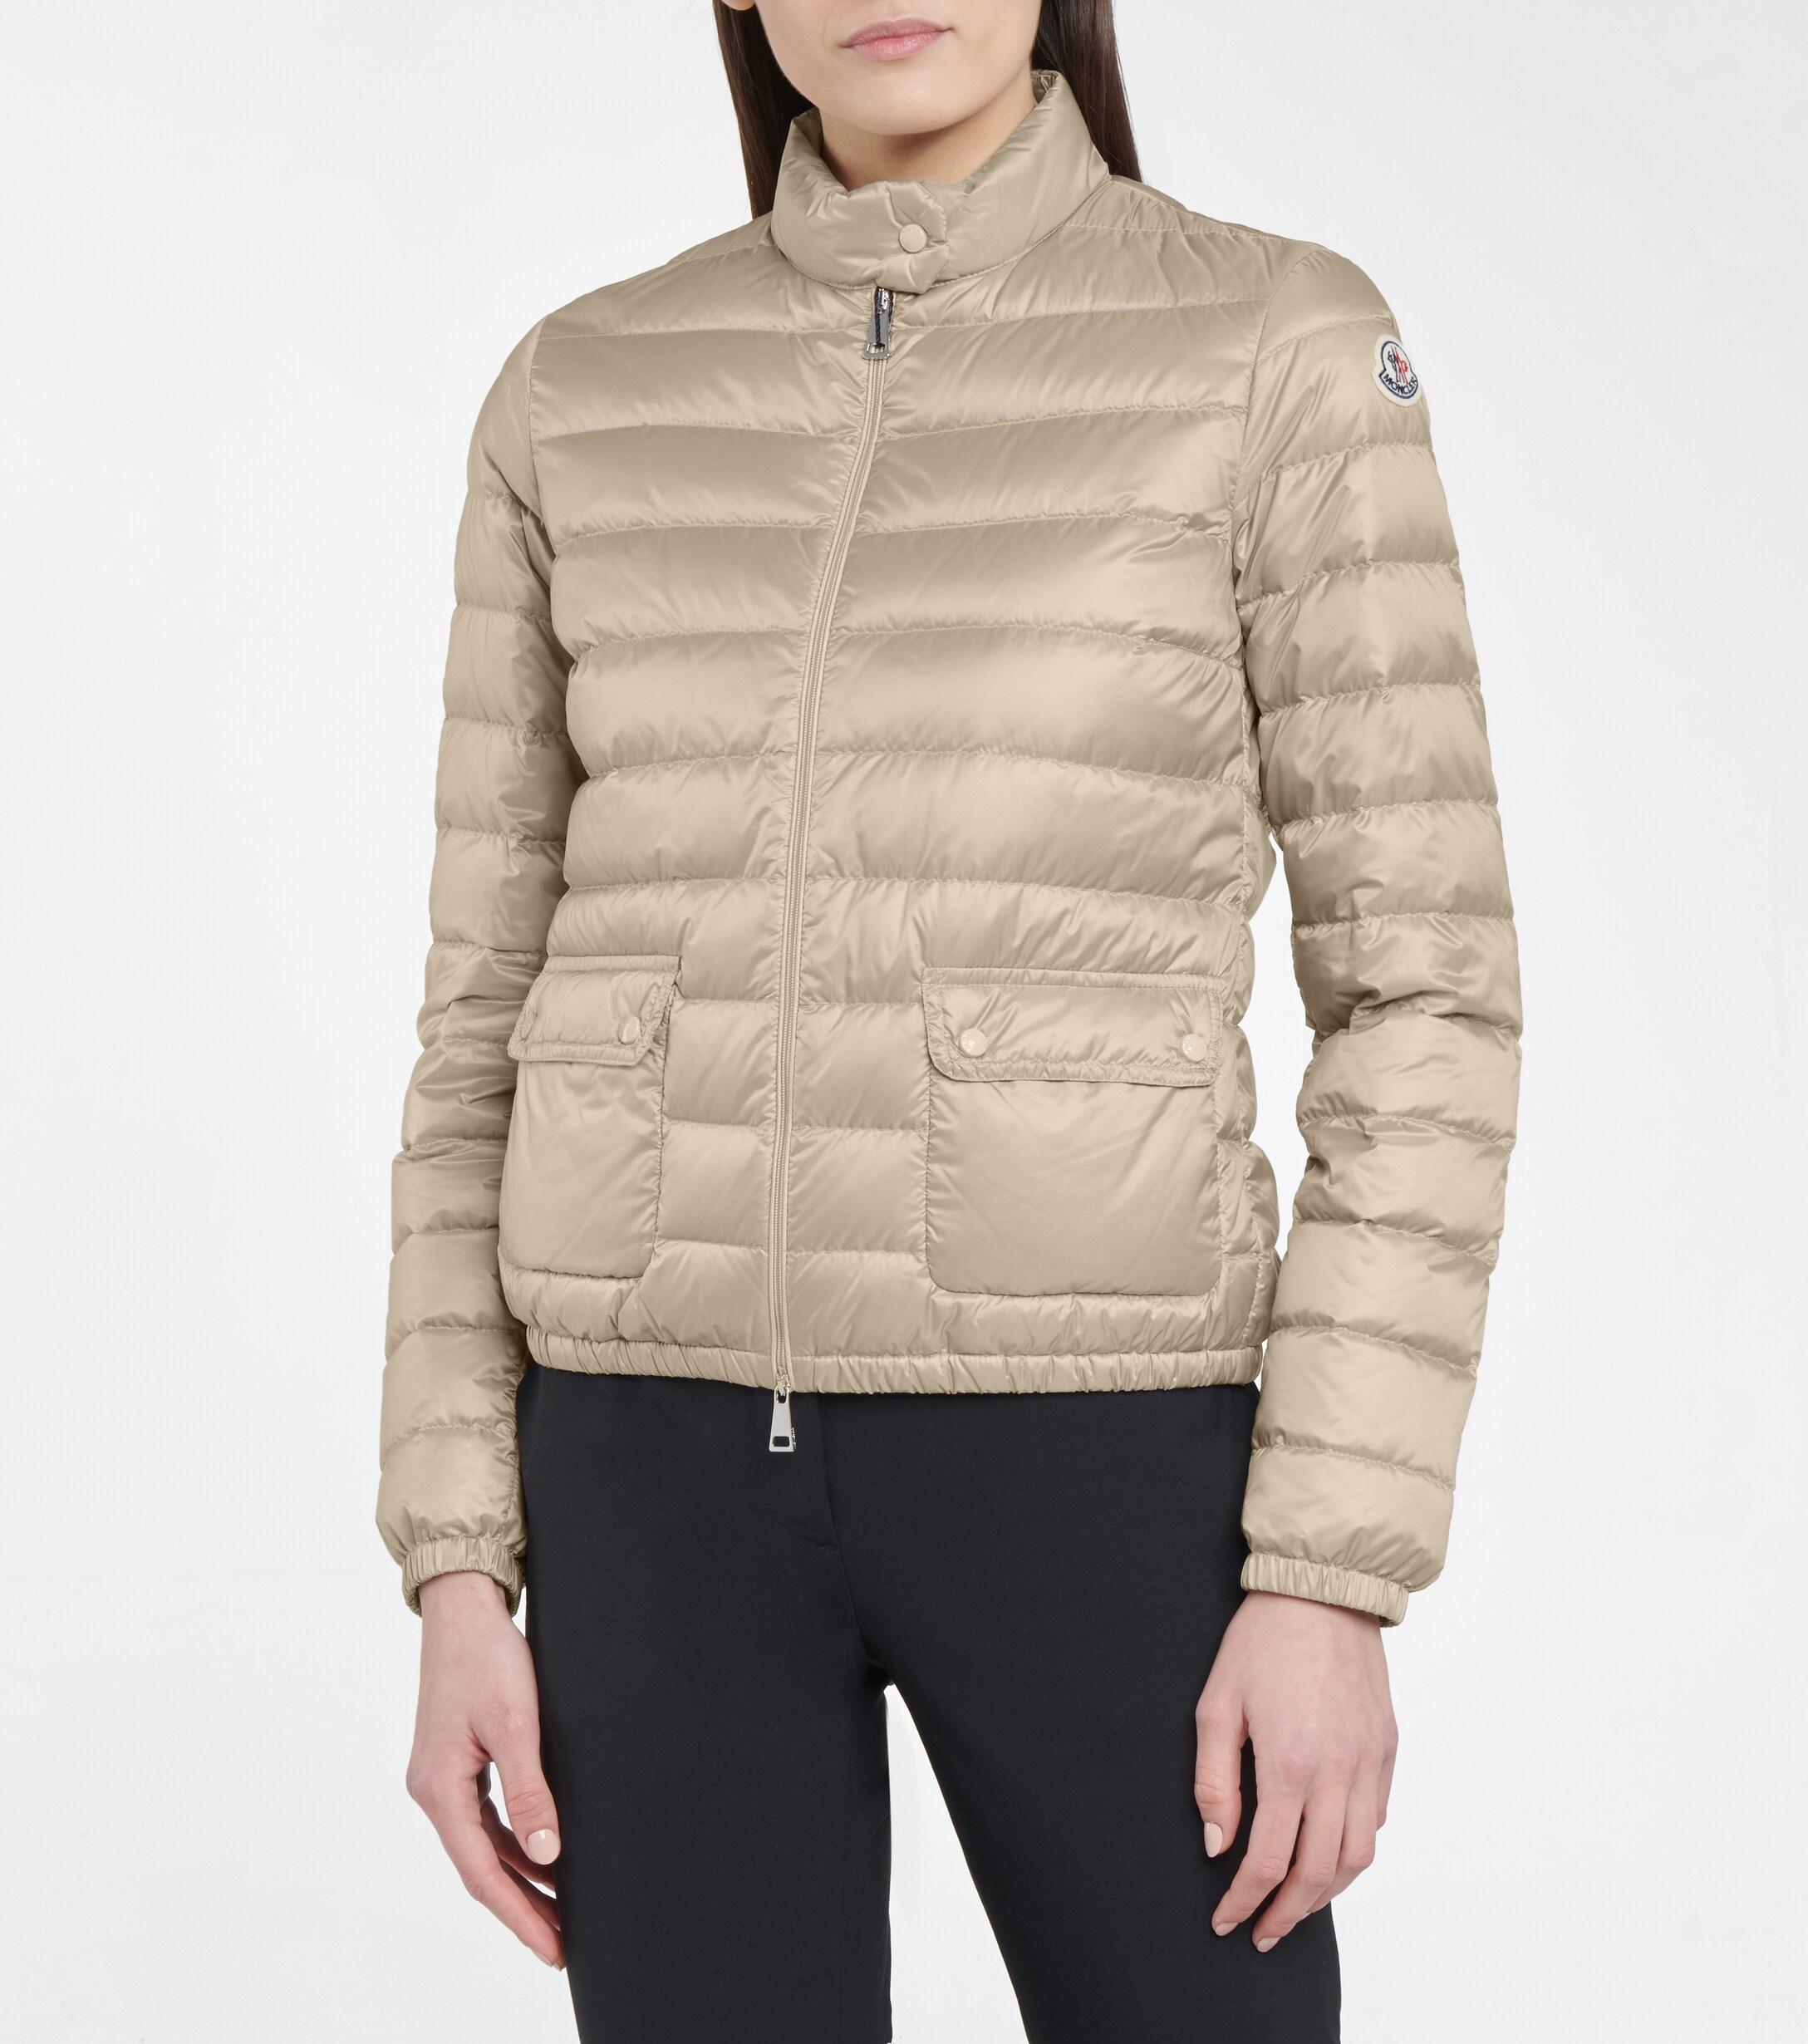 Moncler Lans Quilted Down Jacket in Beige (Natural) - Lyst